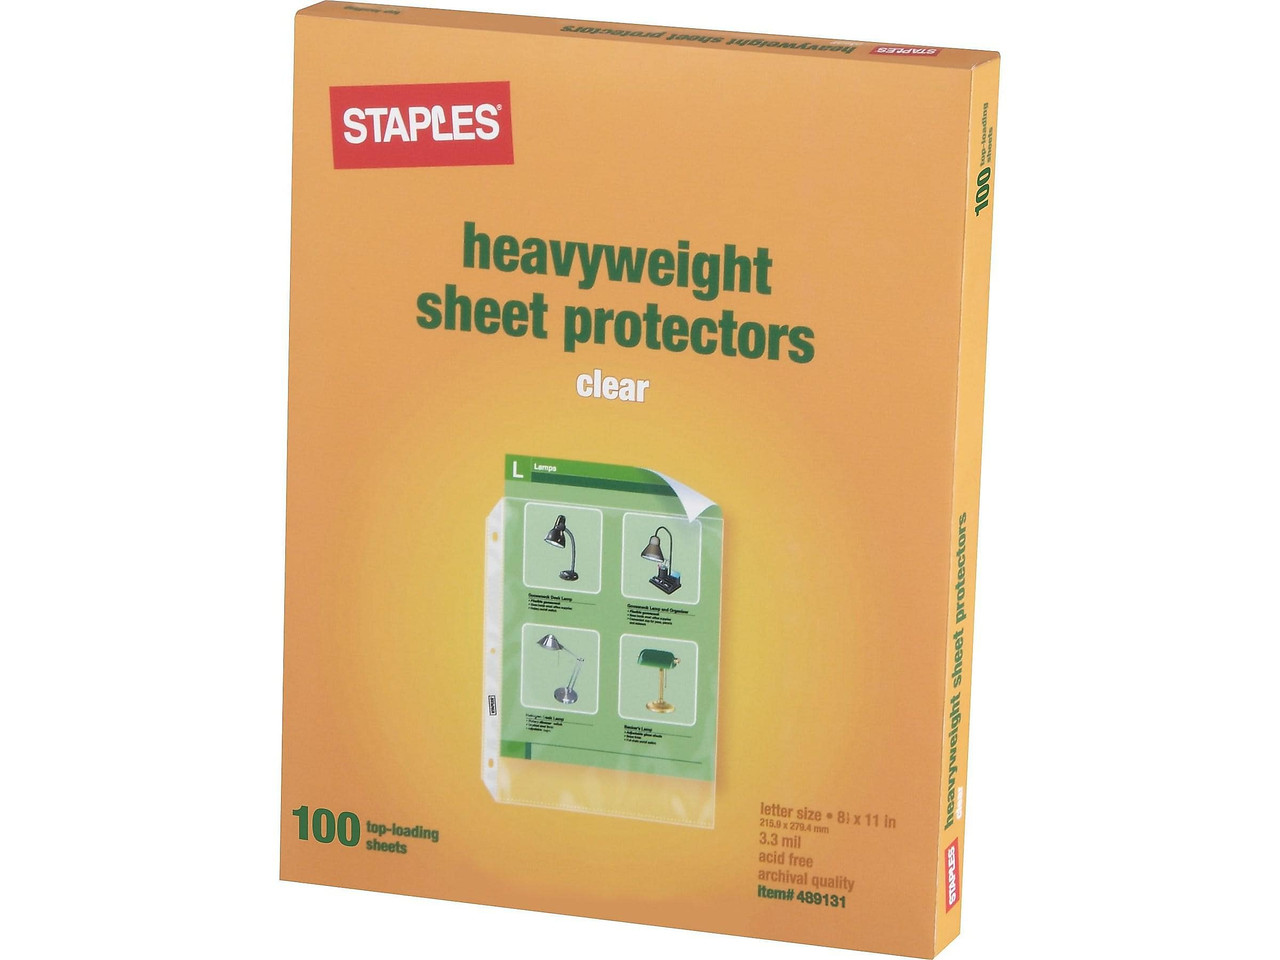 Staples Heavy Weight Trading Card Pages, 8.5 x 11, Clear, 50